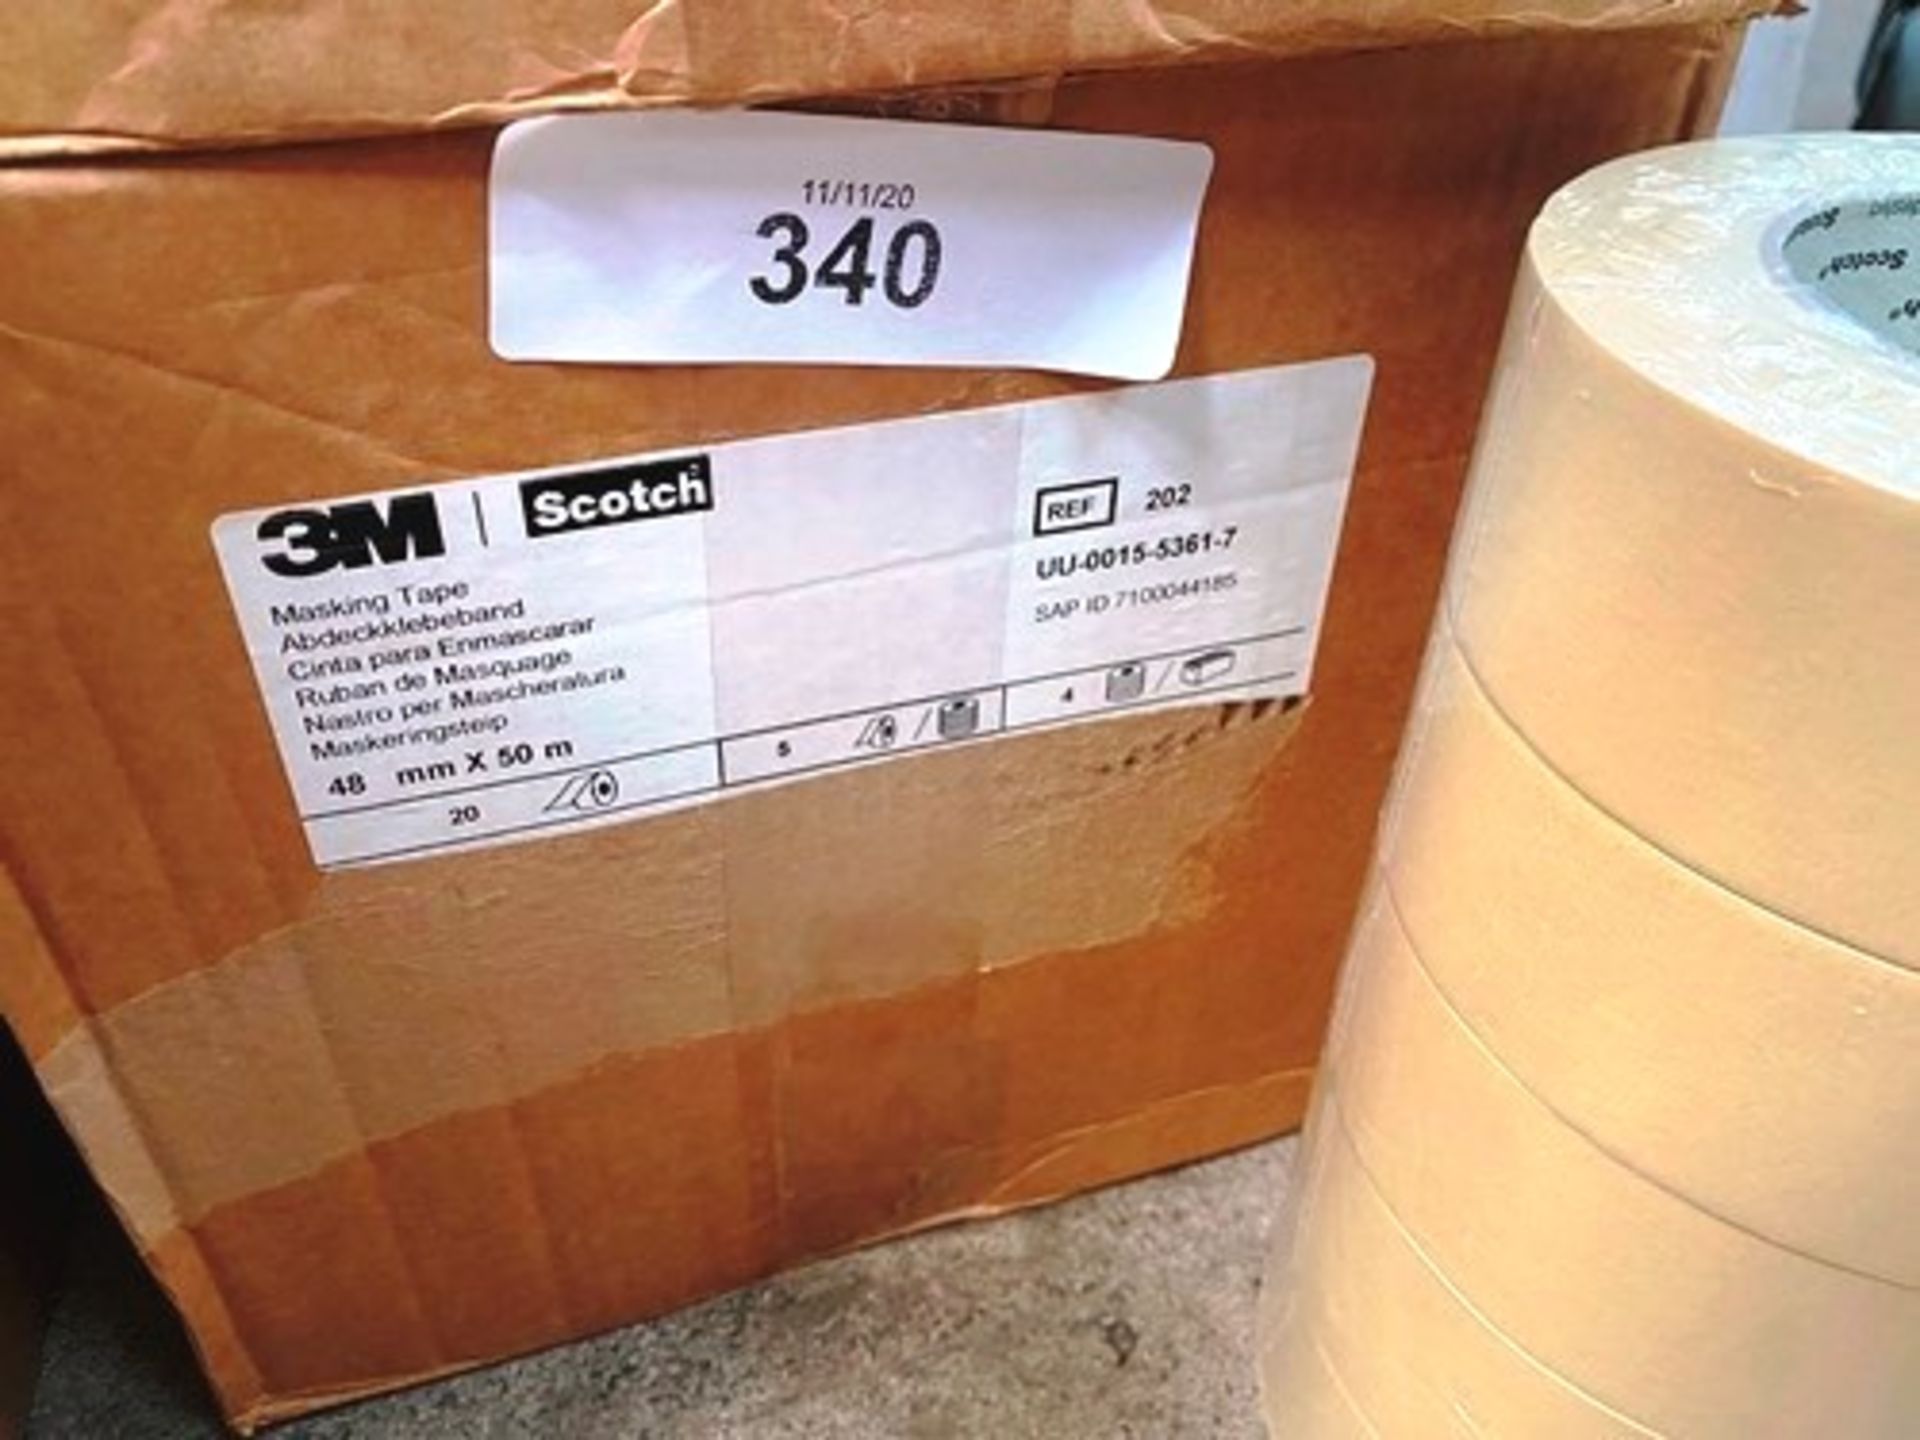 1 x 3M scotch weld high performance neoprene contact adhesive, Model EC-1357, colour grey-green - Image 3 of 5